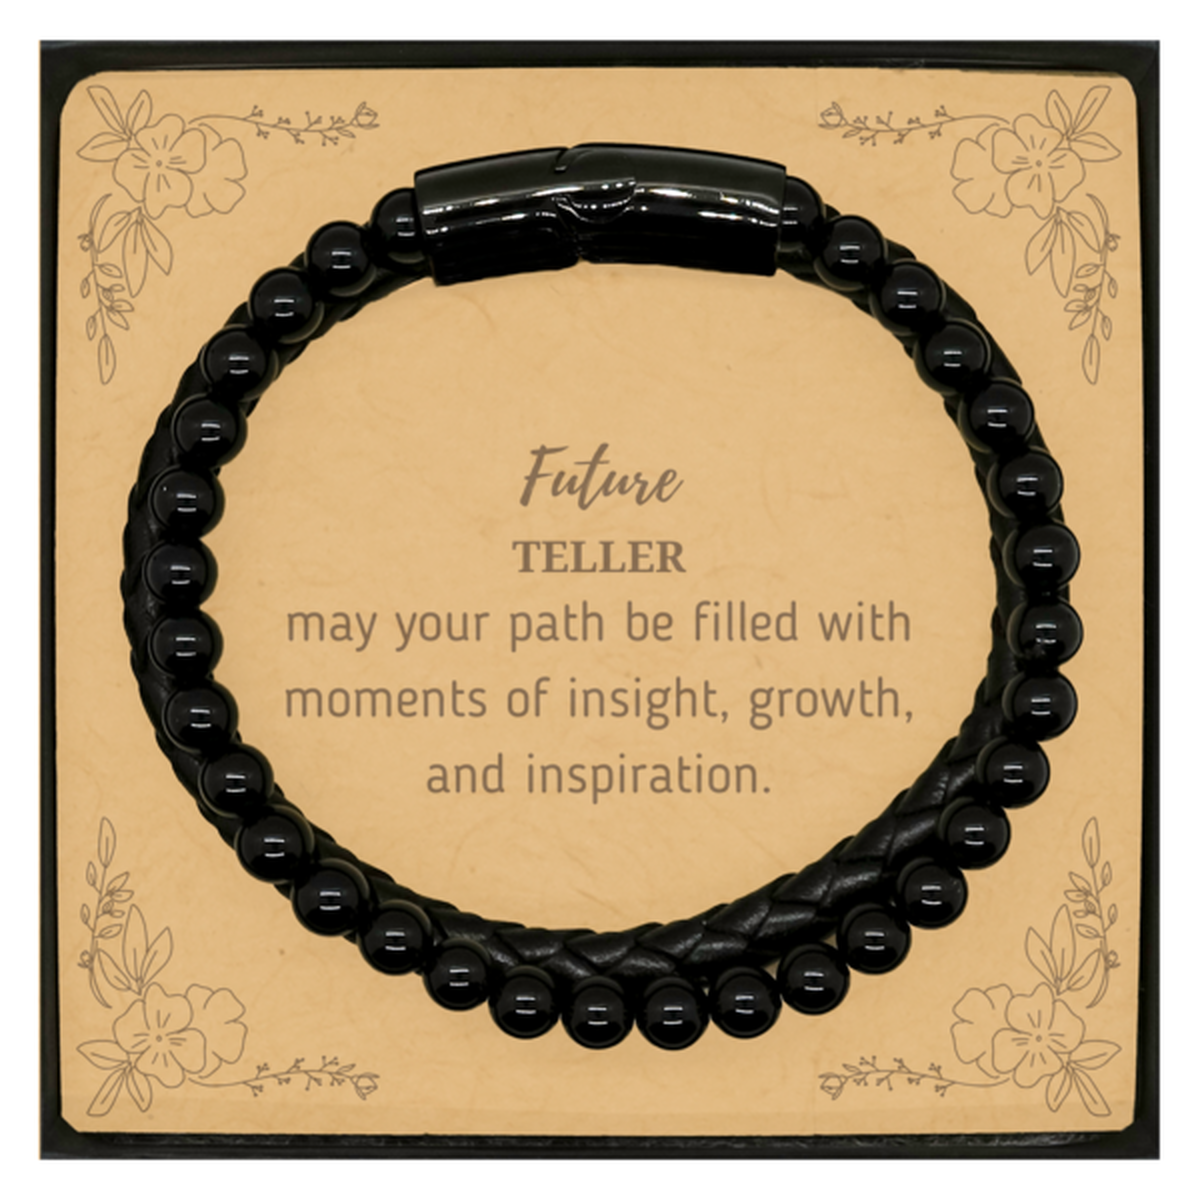 Future Teller Gifts, May your path be filled with moments of insight, Graduation Gifts for New Teller, Christmas Unique Stone Leather Bracelets For Men, Women, Friends